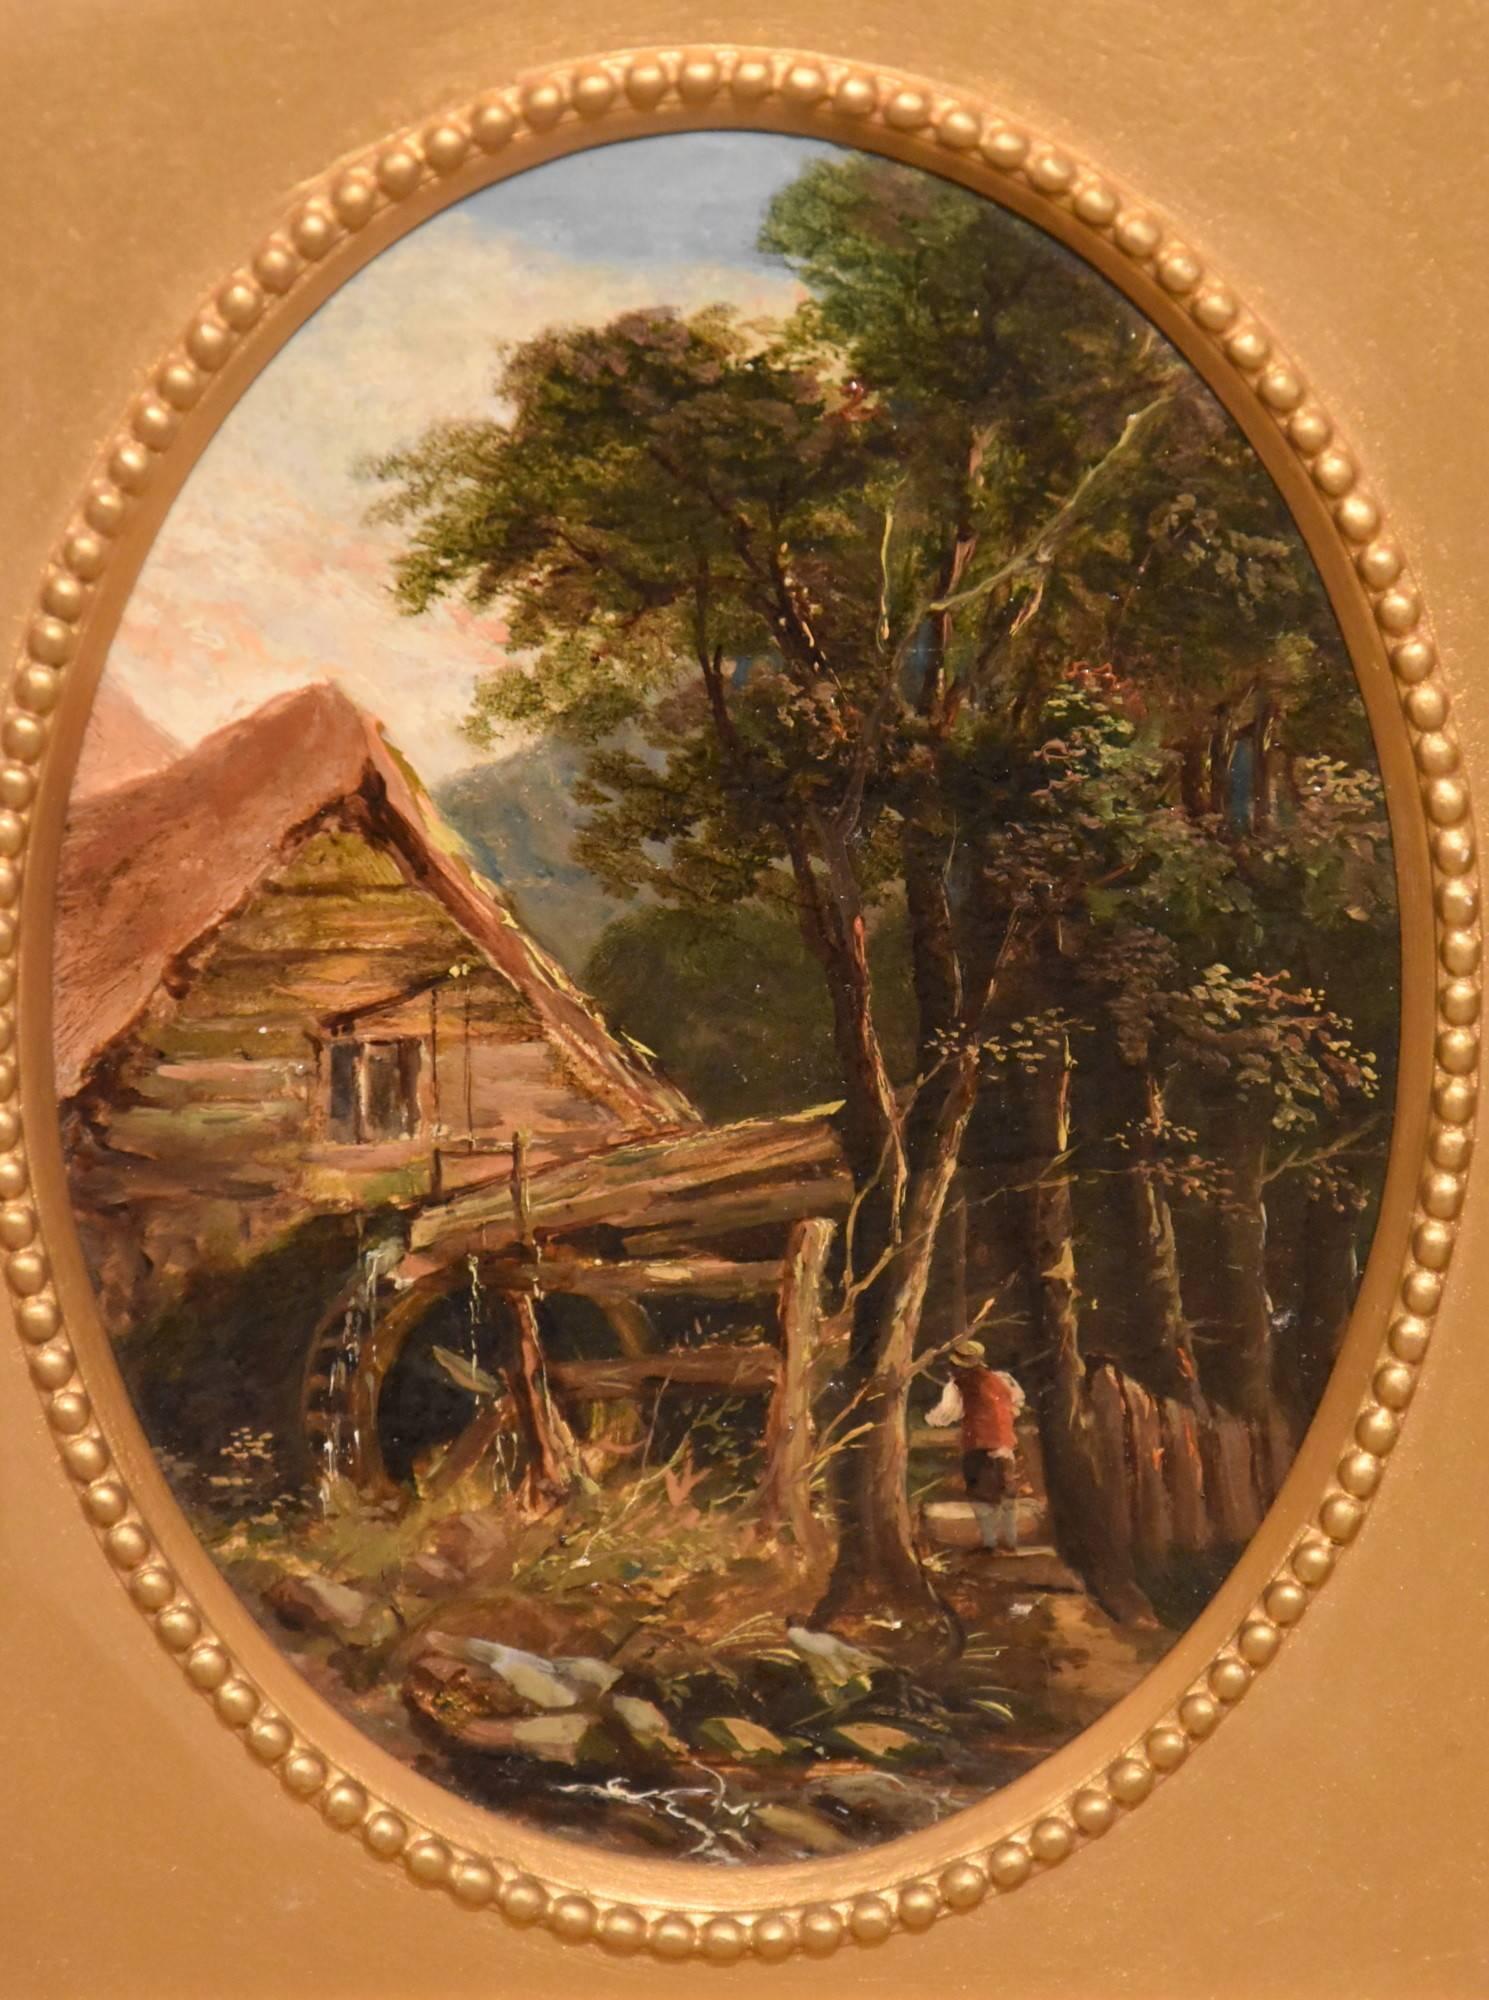 "Waterfall" English School, circa 1870 

Dimensions framed: 
height 13" x width 11" 

All of the items that we advertise for sale have been as accurately described as possible and are in excellent condition, unless otherwise